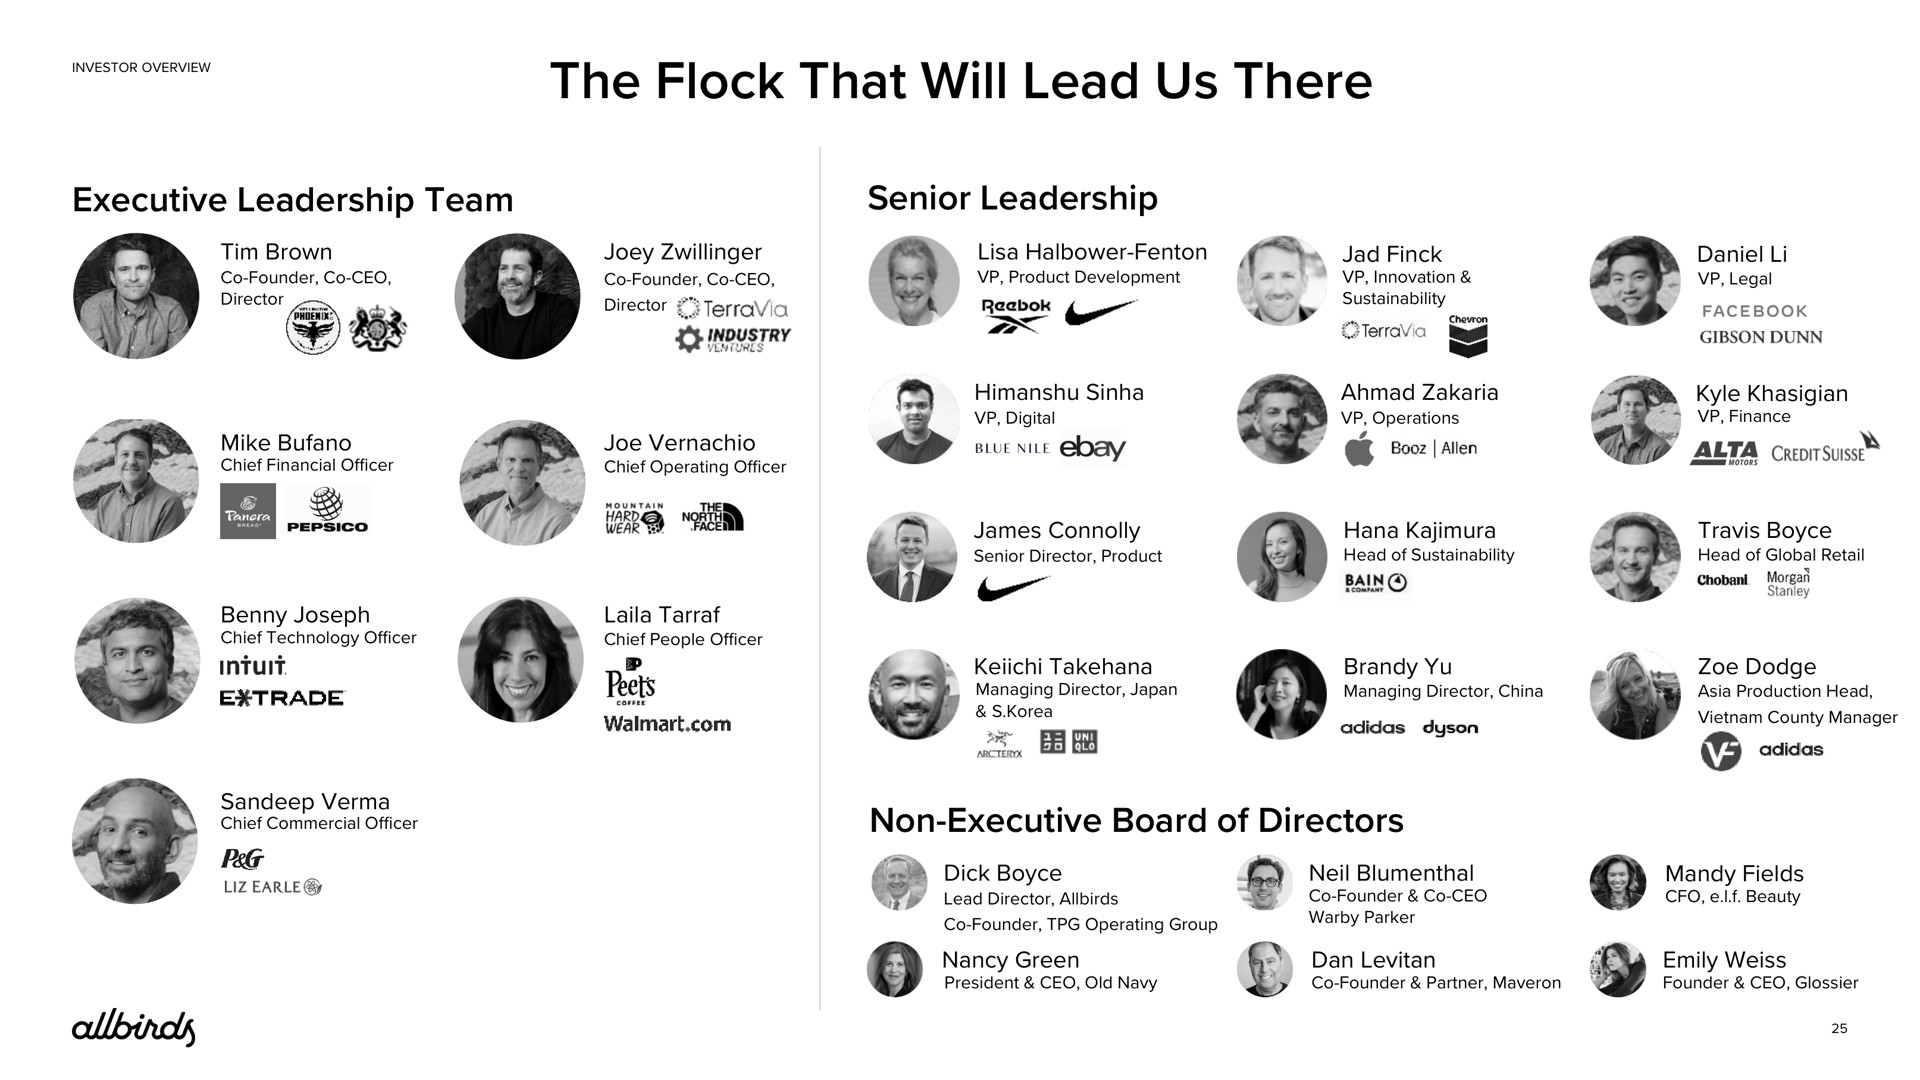 the flock that will lead us there executive leadership team senior leadership non executive board of directors industry pets | Allbirds